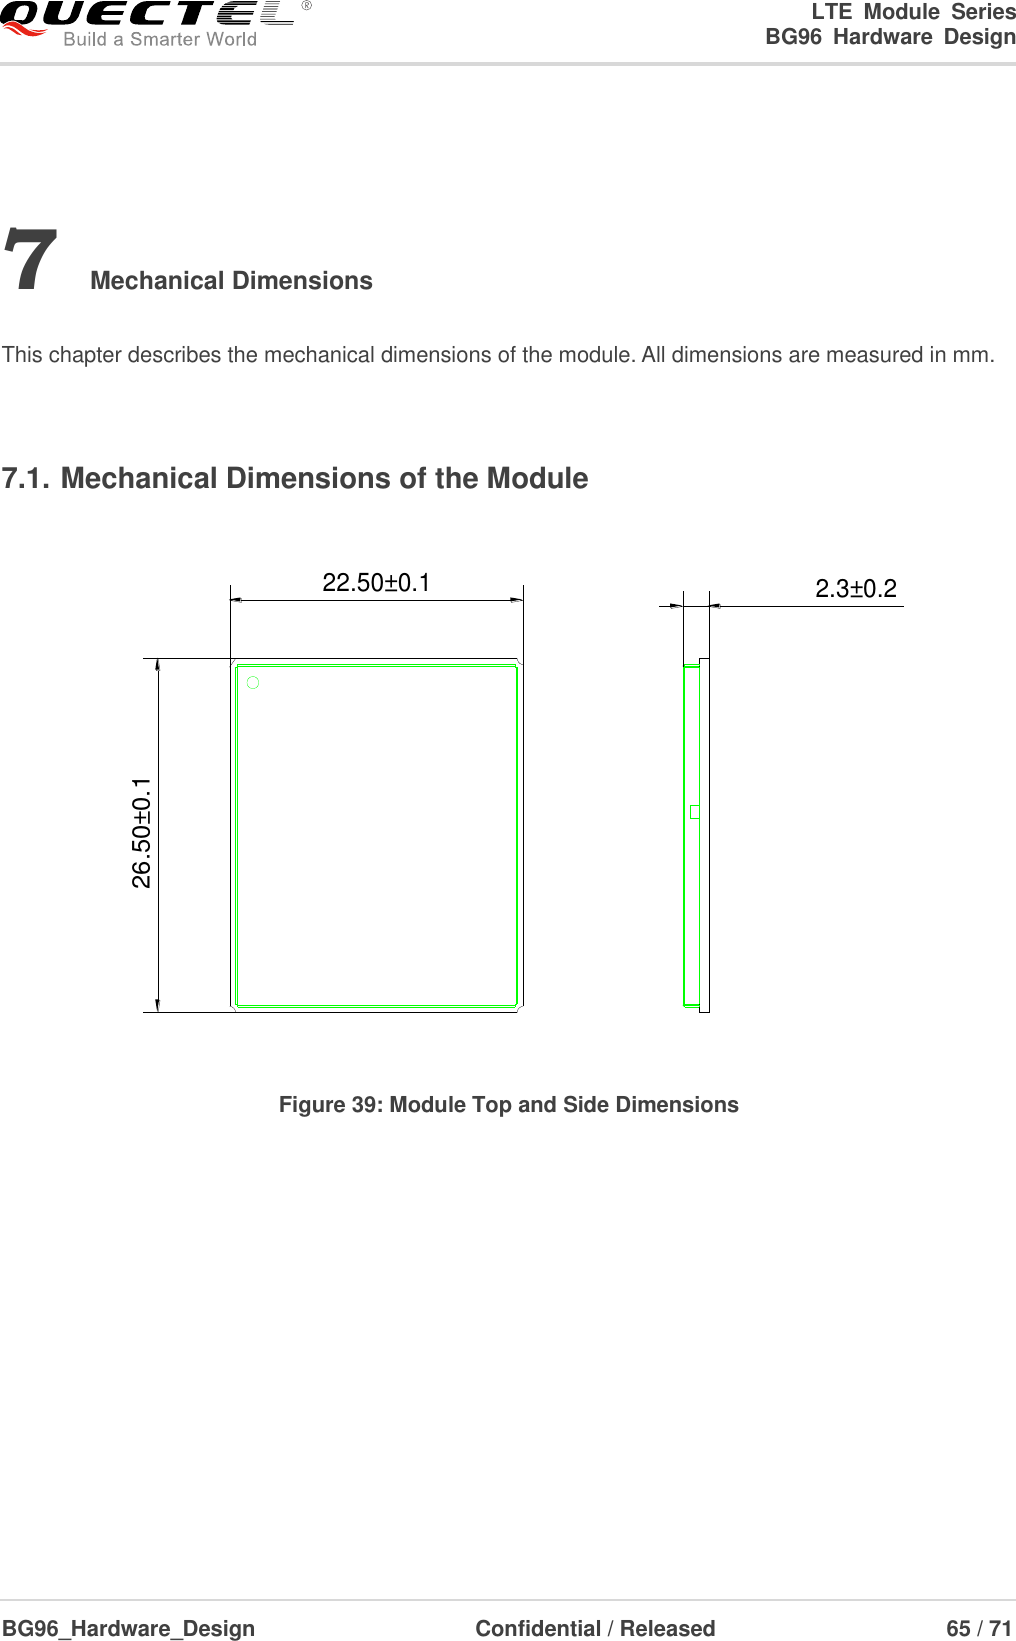 LTE  Module  Series                                                  BG96  Hardware  Design  BG96_Hardware_Design                              Confidential / Released                             65 / 71    7 Mechanical Dimensions  This chapter describes the mechanical dimensions of the module. All dimensions are measured in mm.  7.1. Mechanical Dimensions of the Module 22.50±0.126.50±0.12.3±0.2 Figure 39: Module Top and Side Dimensions  